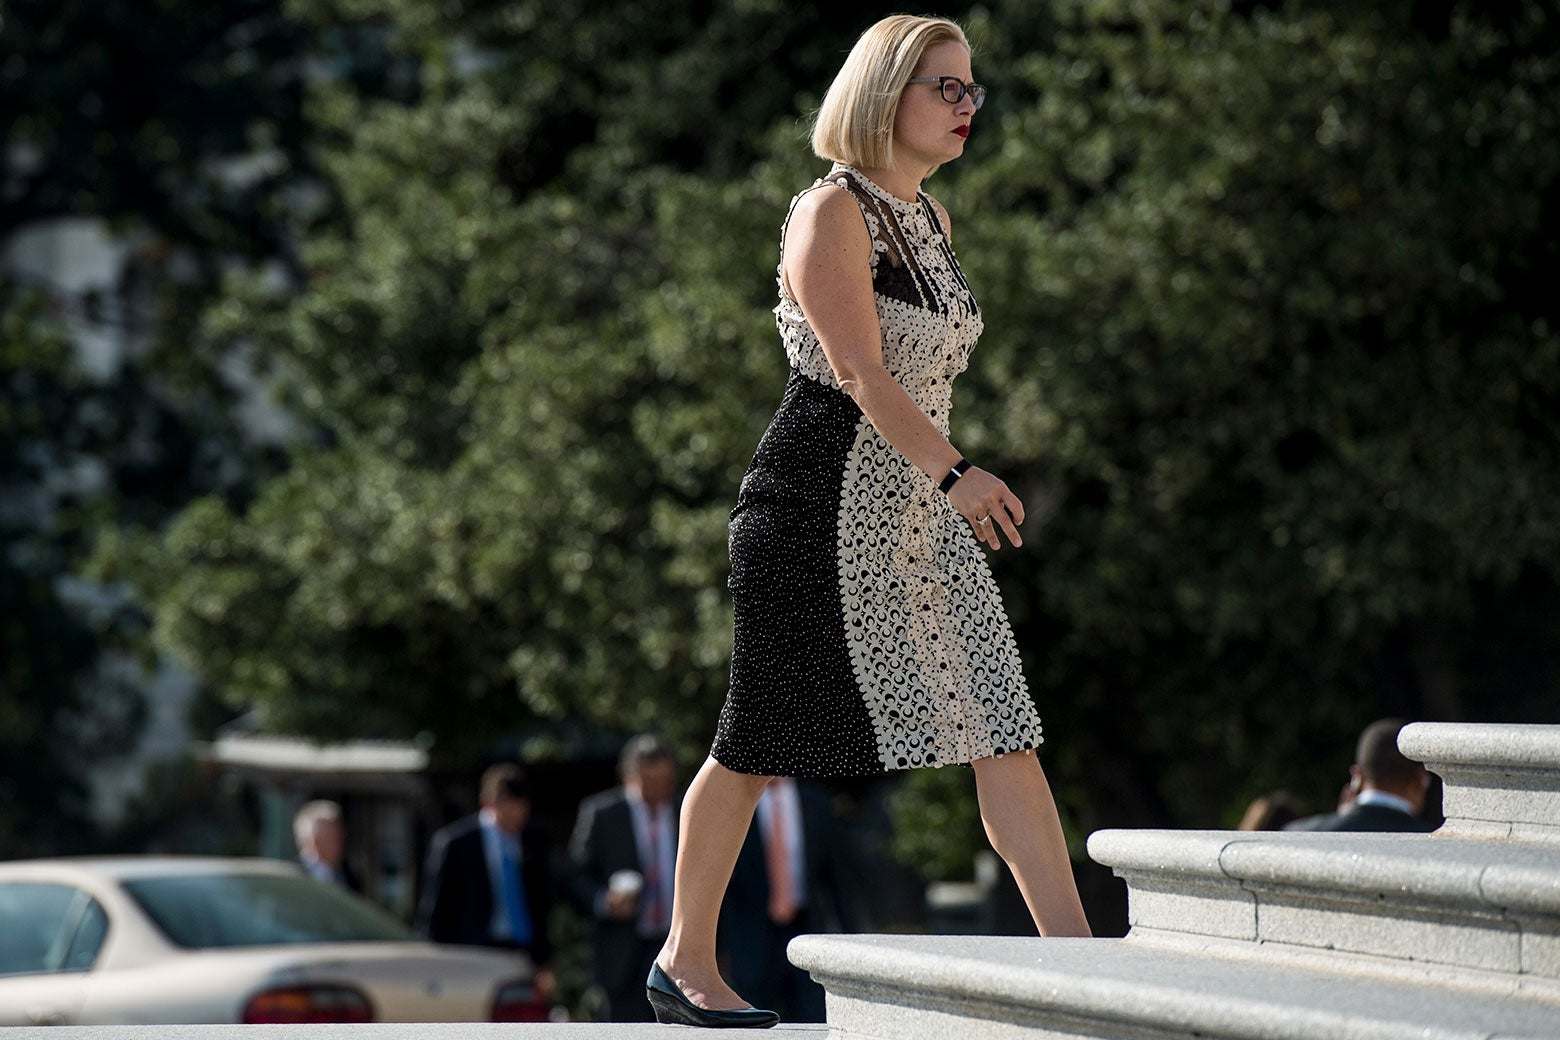 Kyrsten Sinema walks up the House steps in a textured, lacy sleeveless black and cream dress.